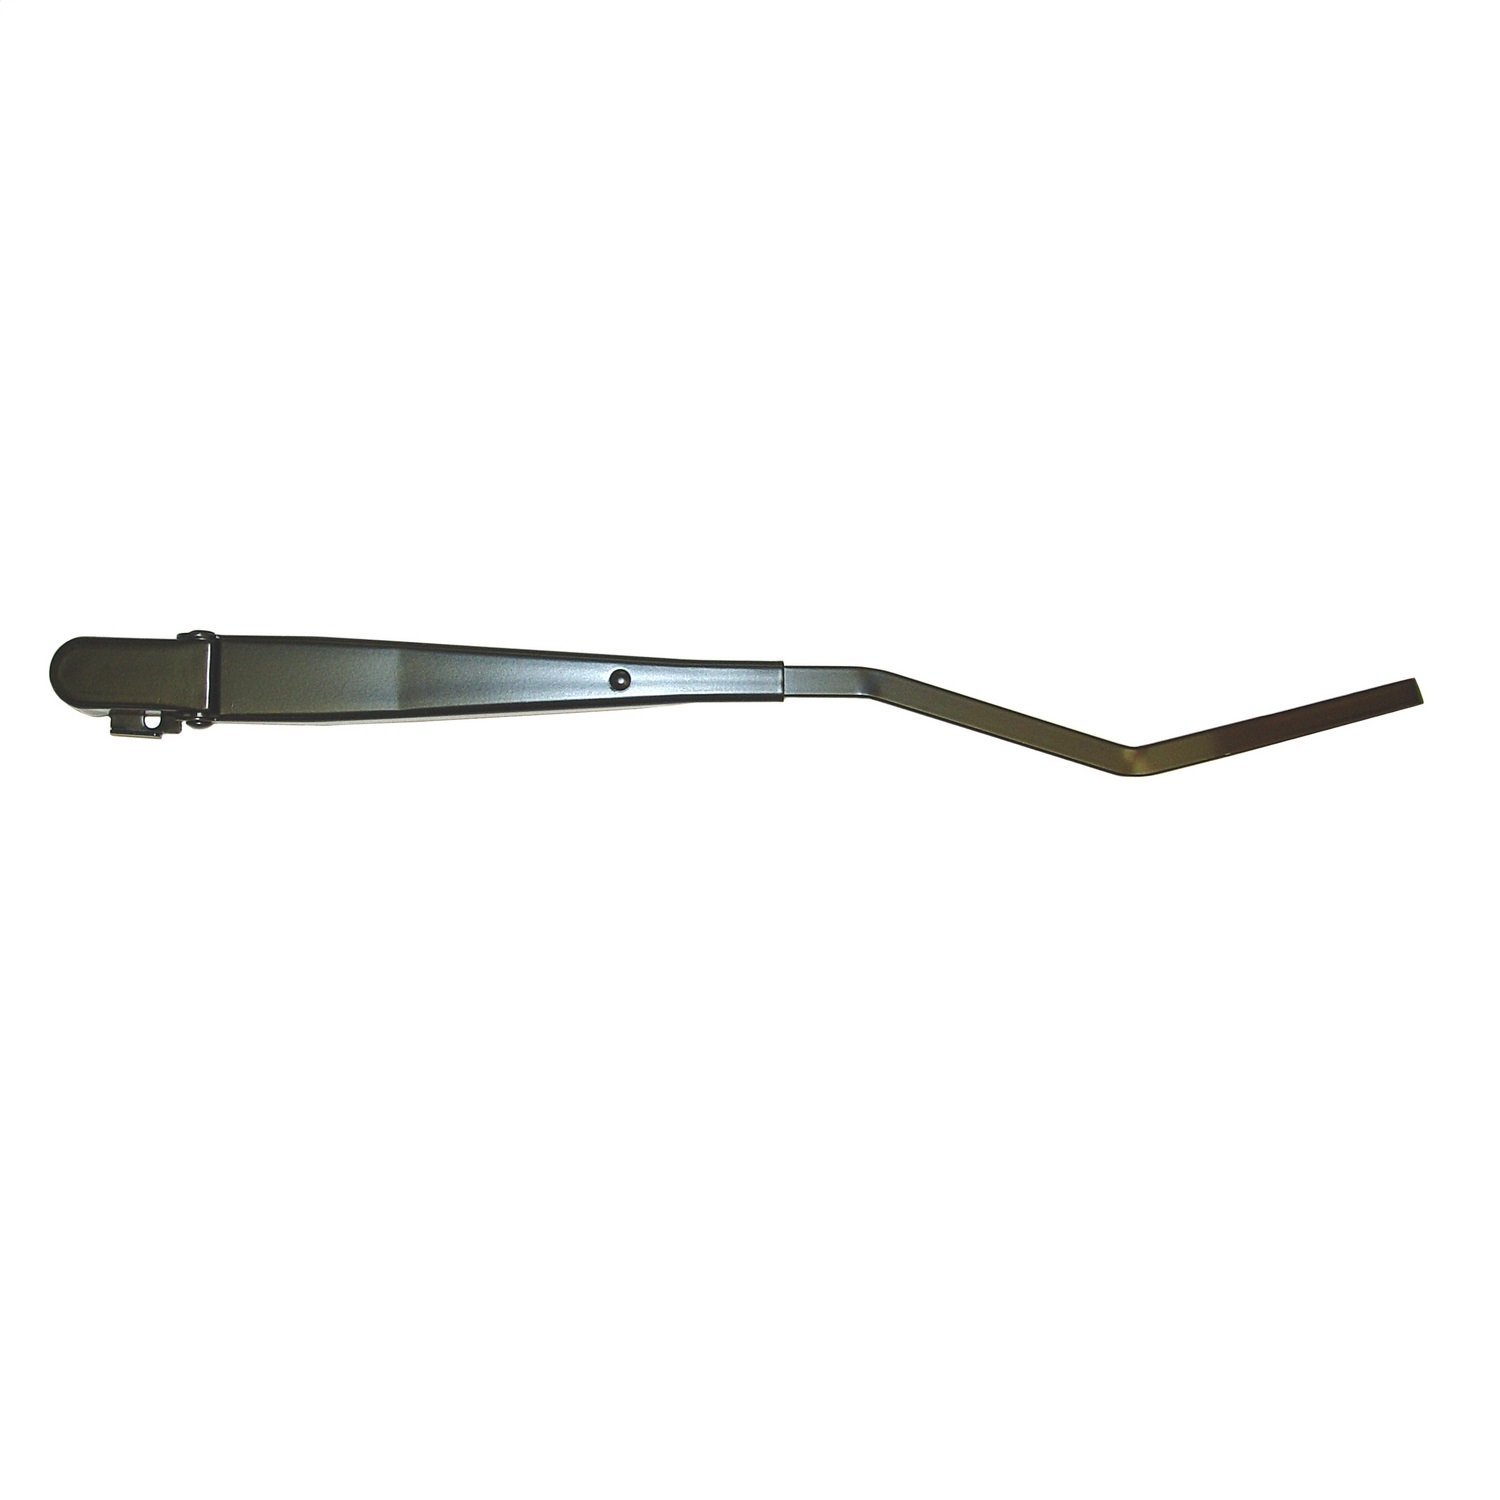 Replacement front windshield wiper arm from Omix-ADA, Fits 97-01 Jeep Cherokee XJ ., Fits left or right side.